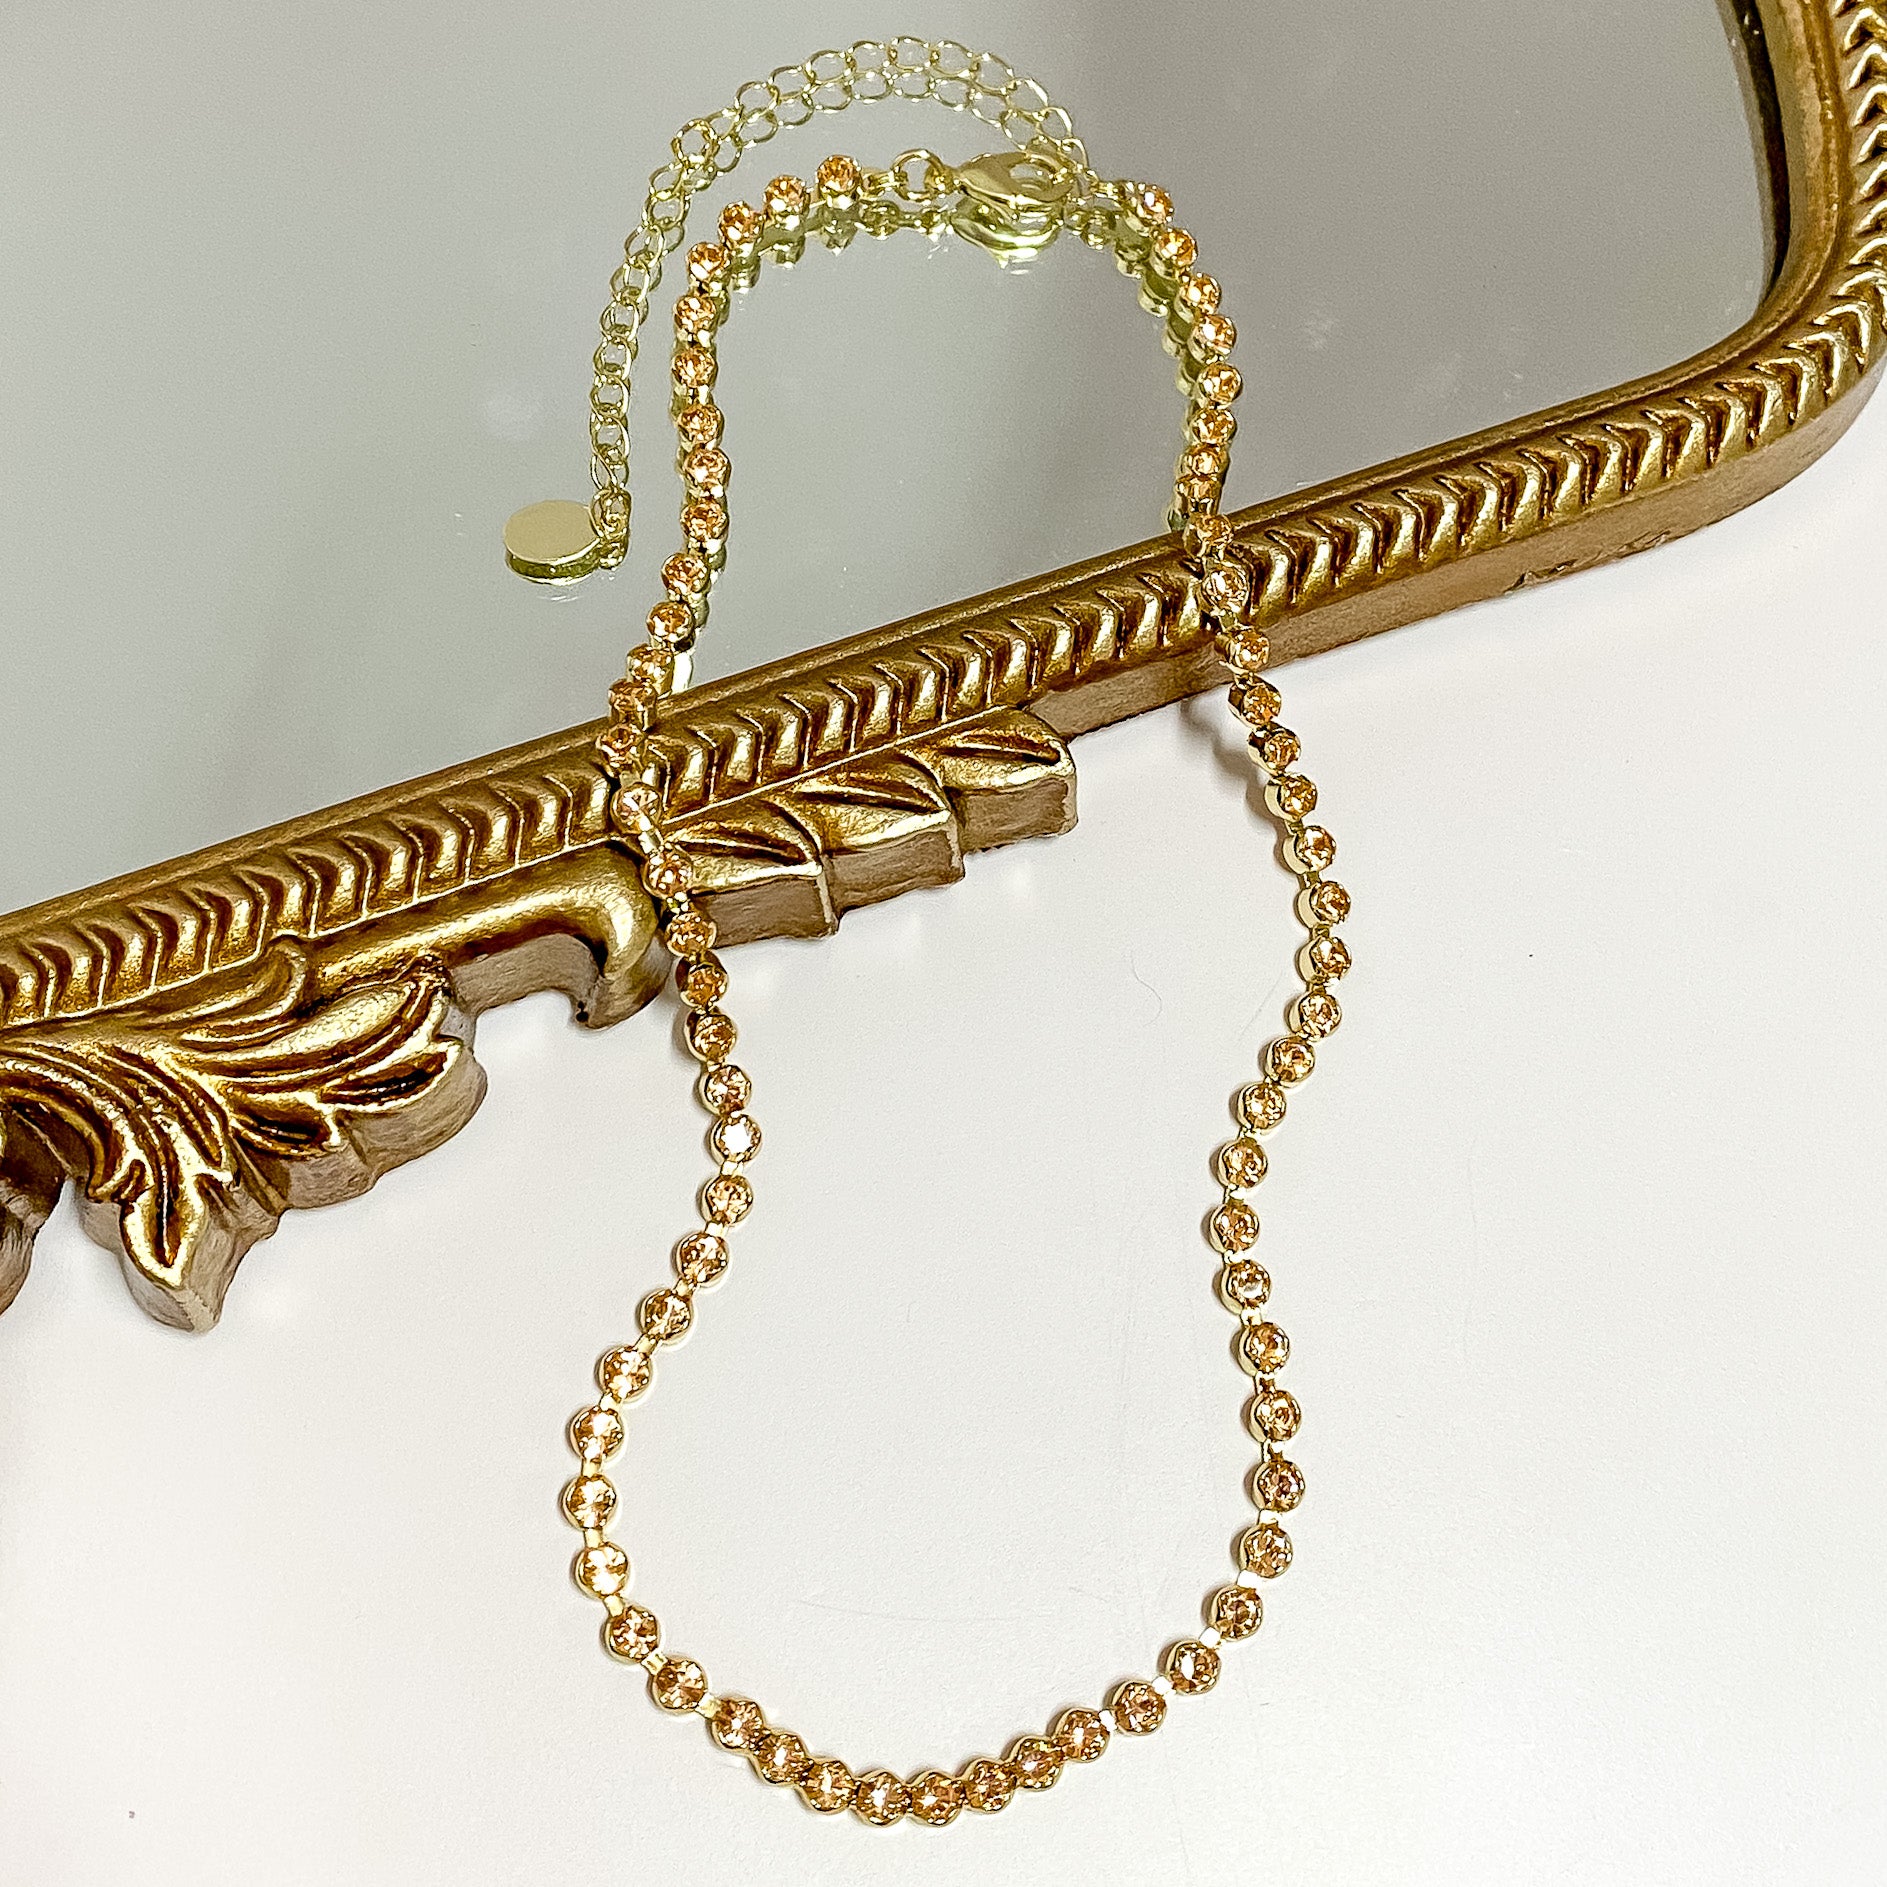 Pictured is a gold necklace with light beige crystals. This necklace is pictured partially on a gold mirror on a white background.